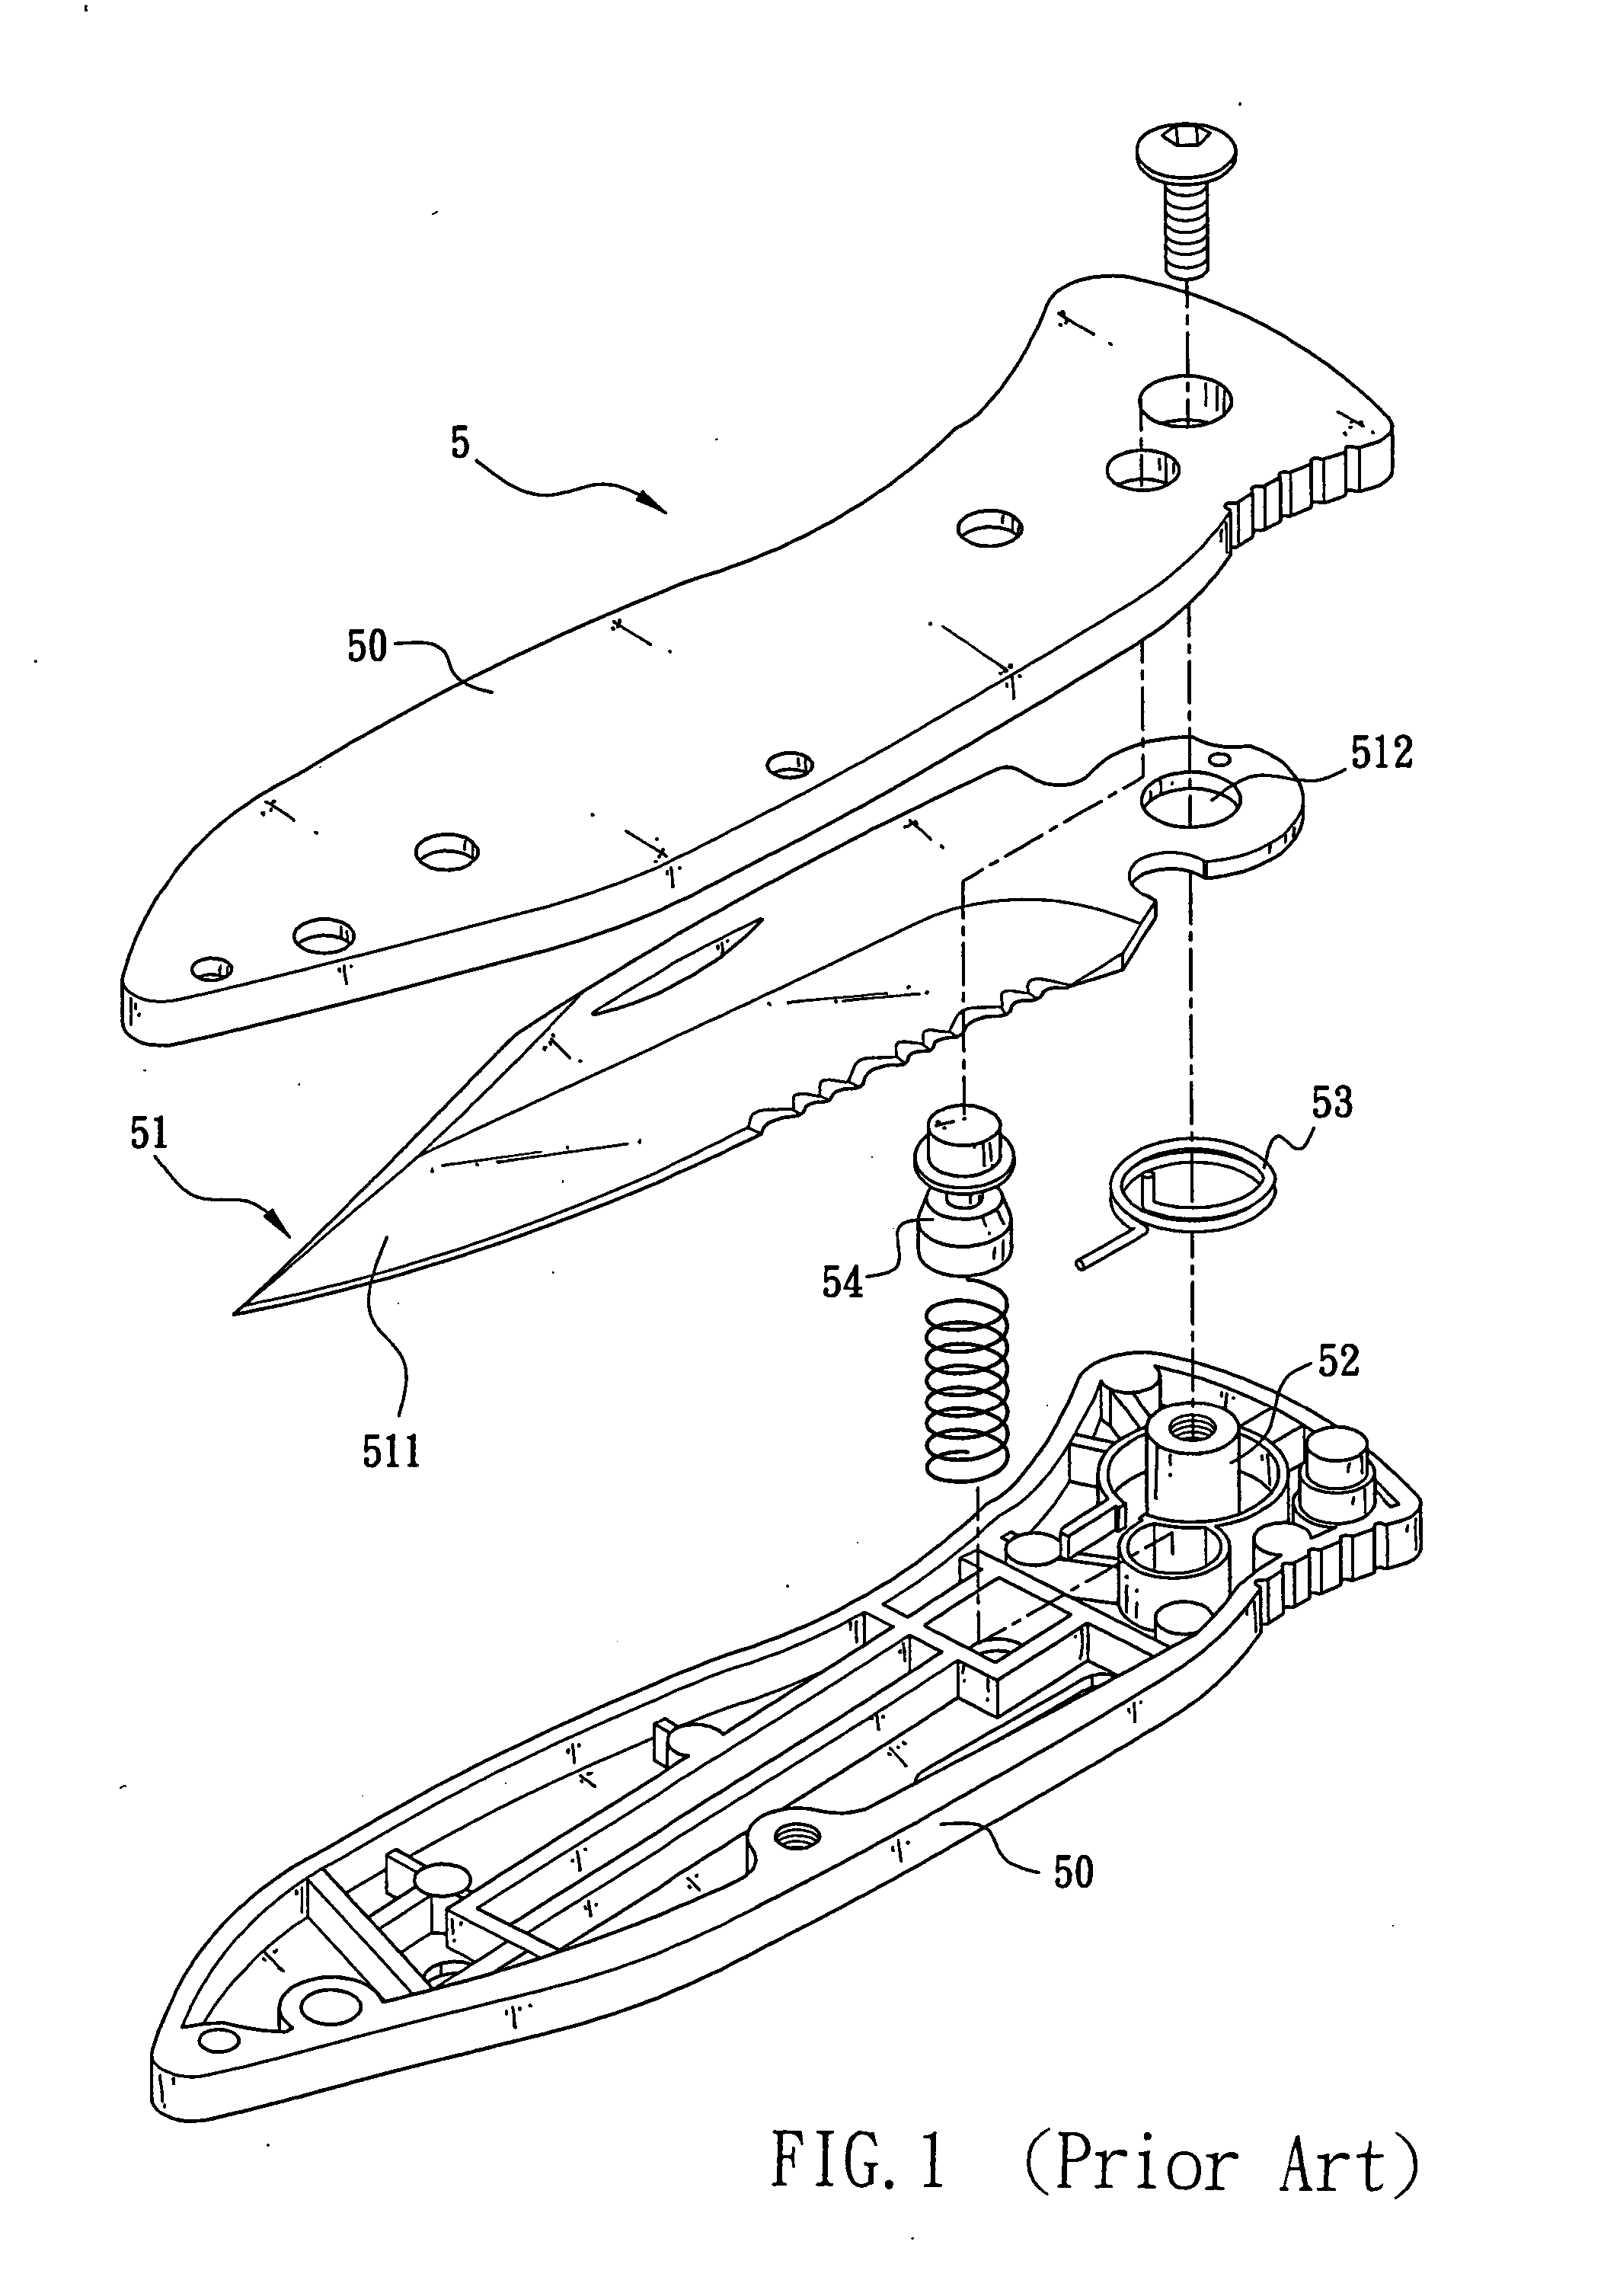 Folding knife assembly with positionable blade